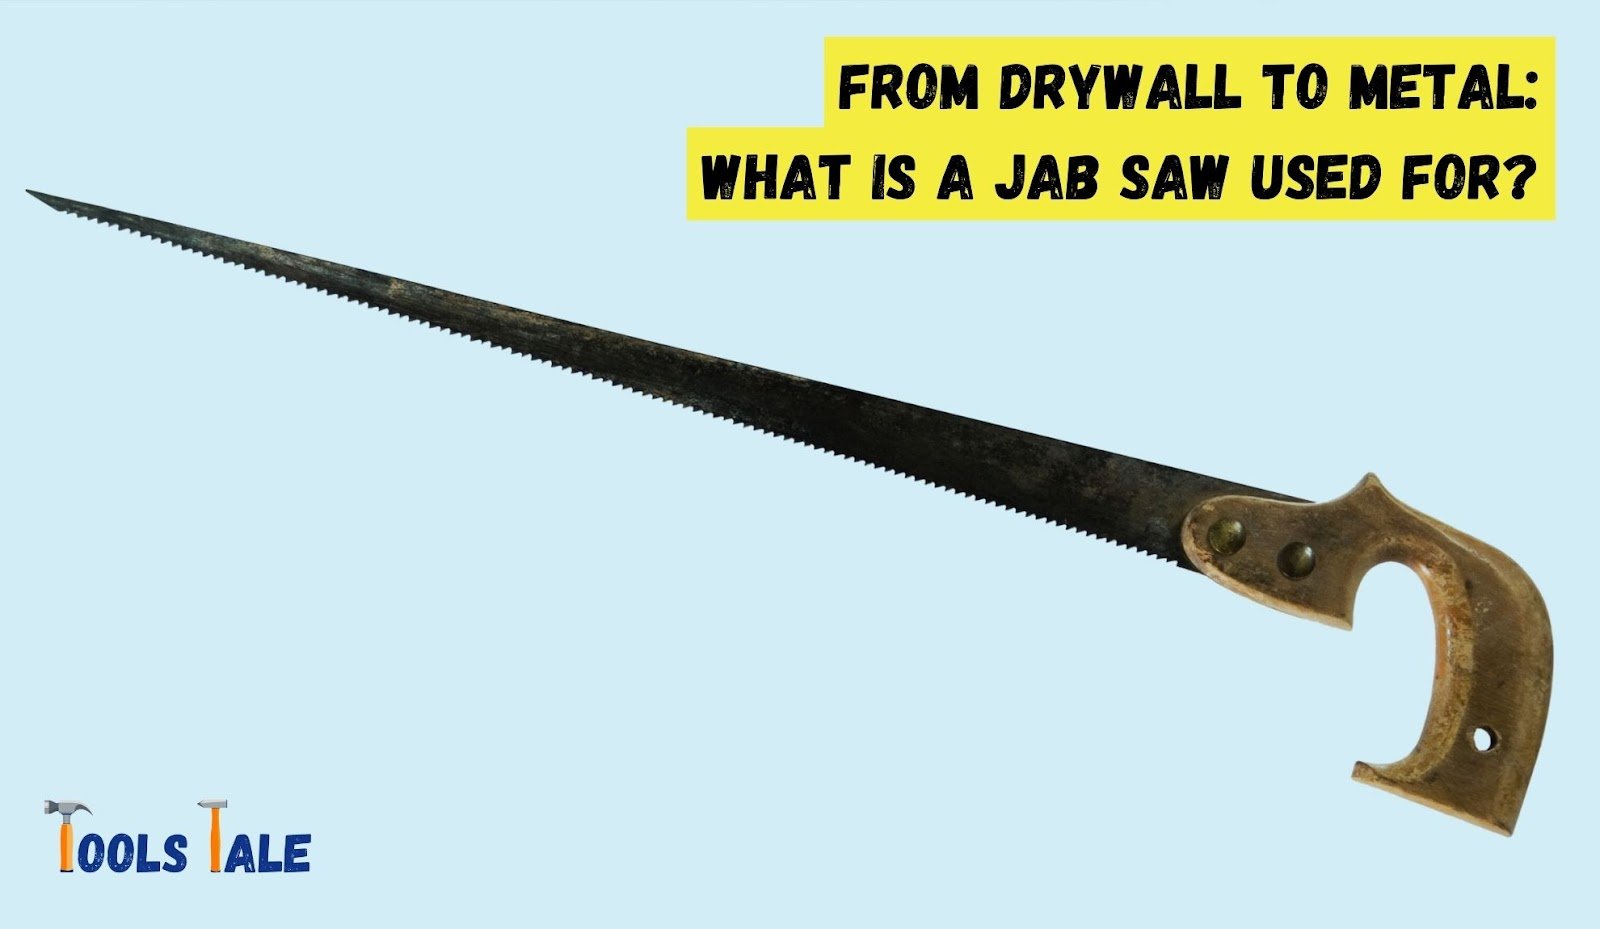 What is a jab saw used for